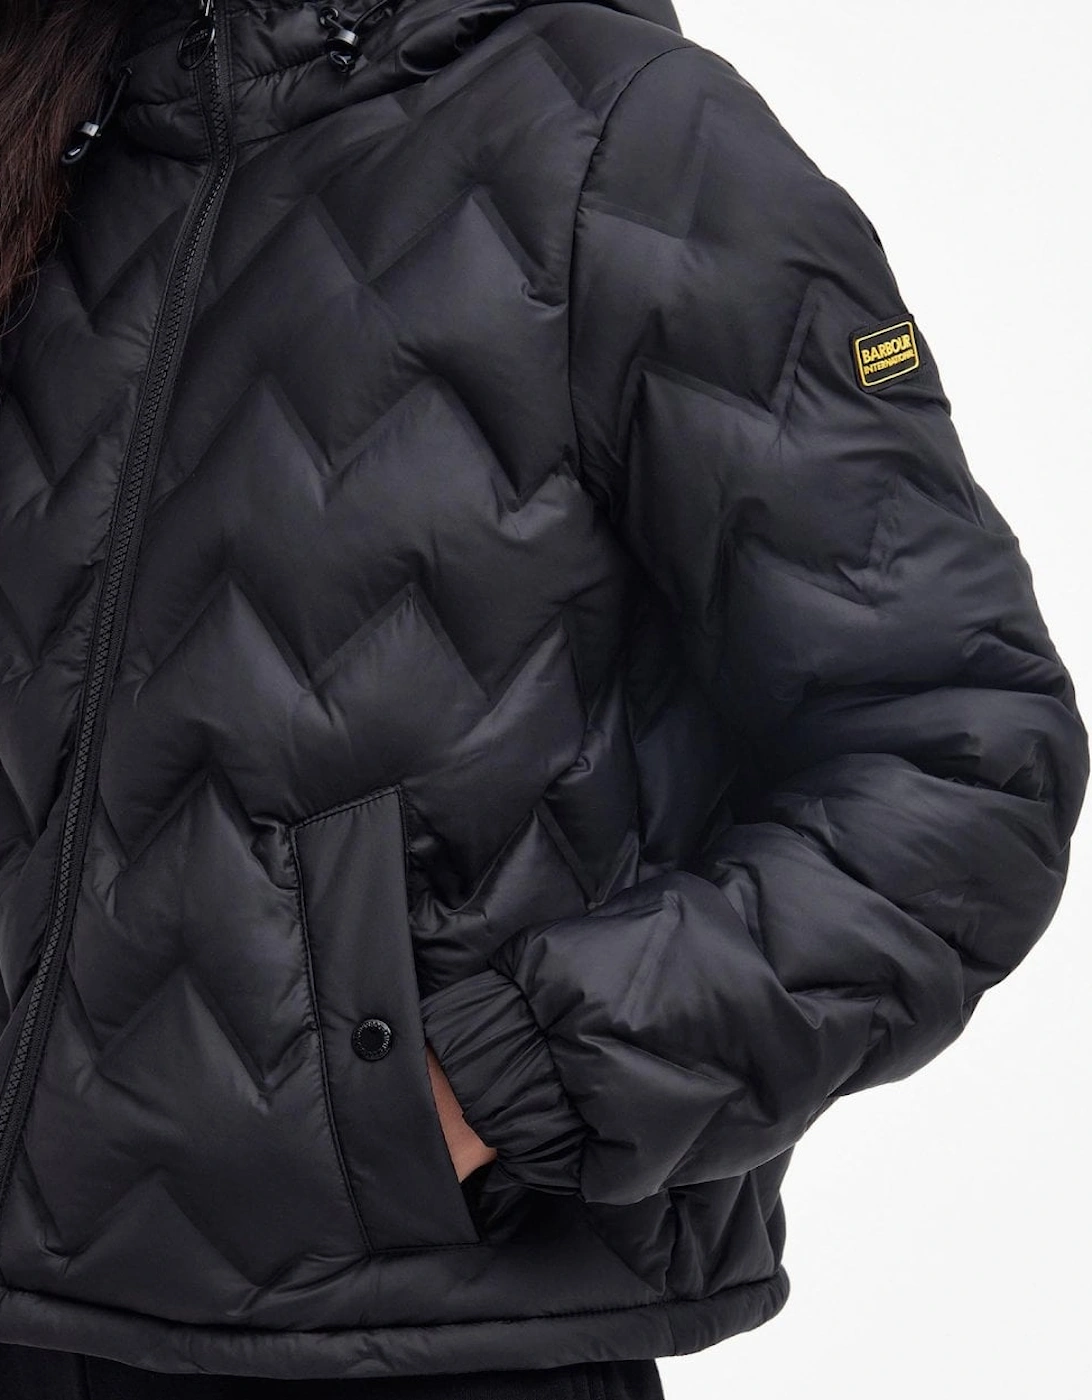 Smith Womens Quilted Jacket